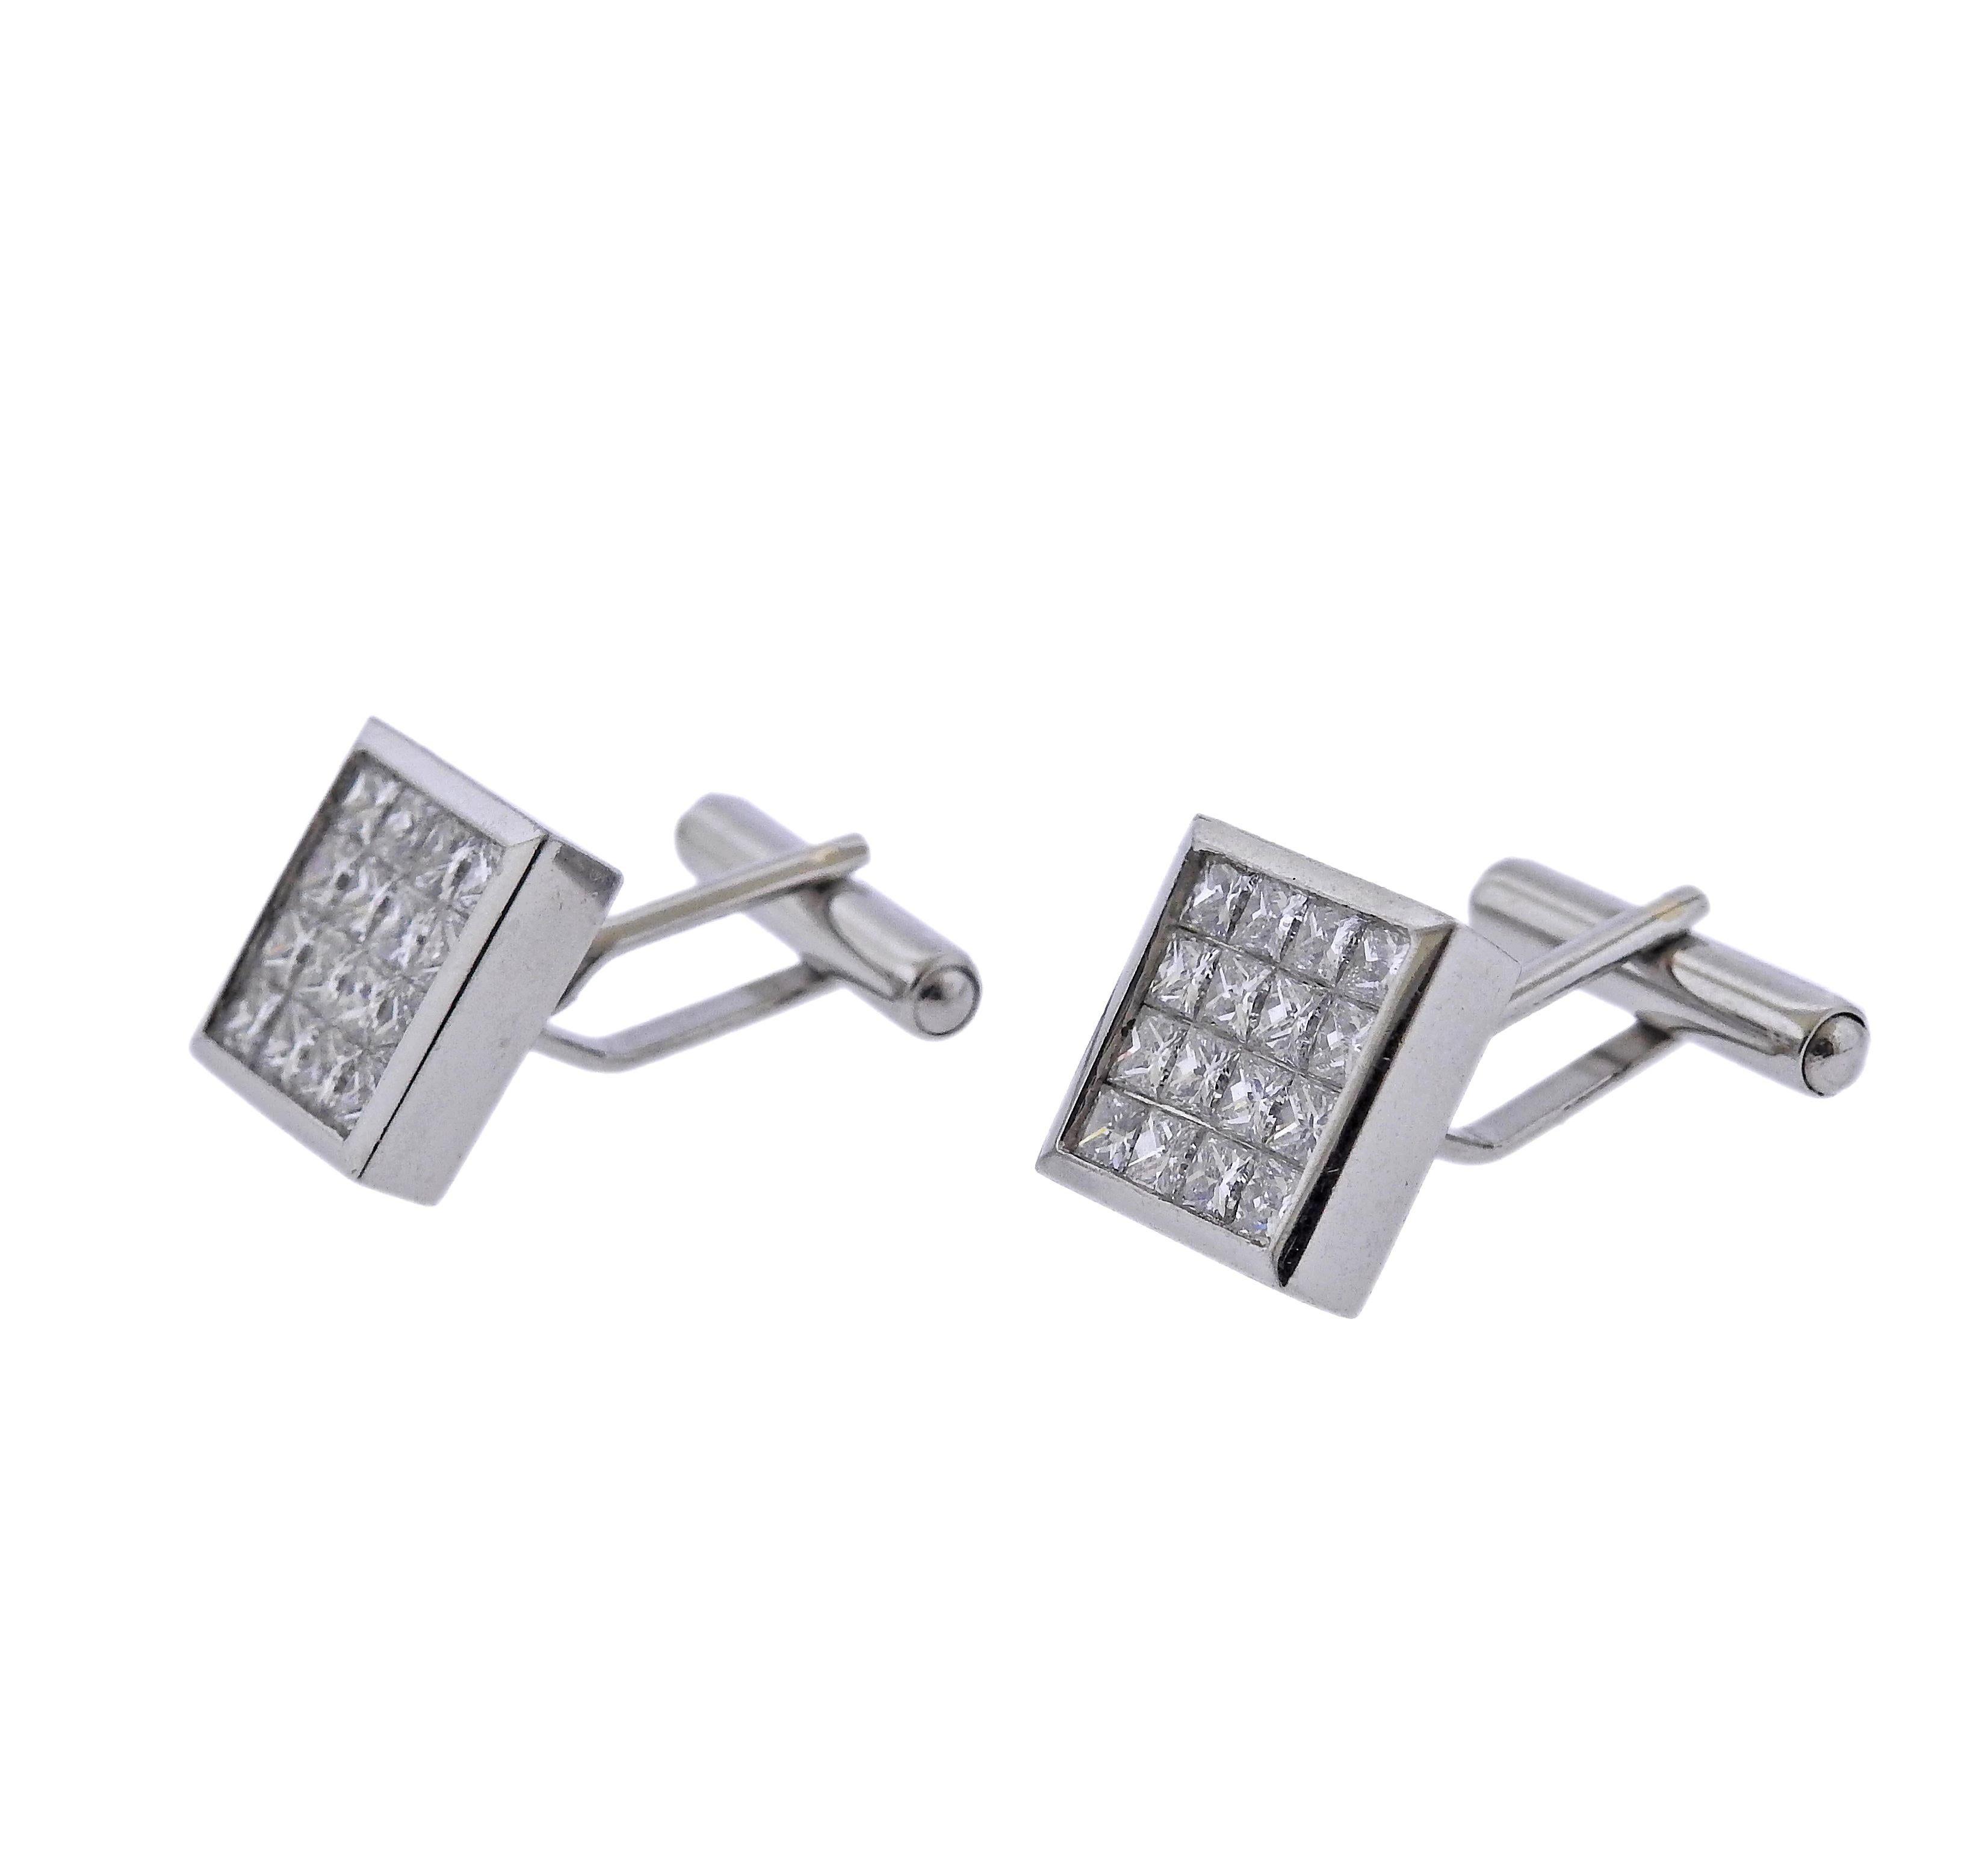 Exquisite platinum dress set of cufflinks and studs, with approx. 8.50ctw in GH/VS diamonds. Cufflink top is 14mm x 14mm, stud top - 10mm x 10mm. Weight - 53.6 grams. Marked Plat.